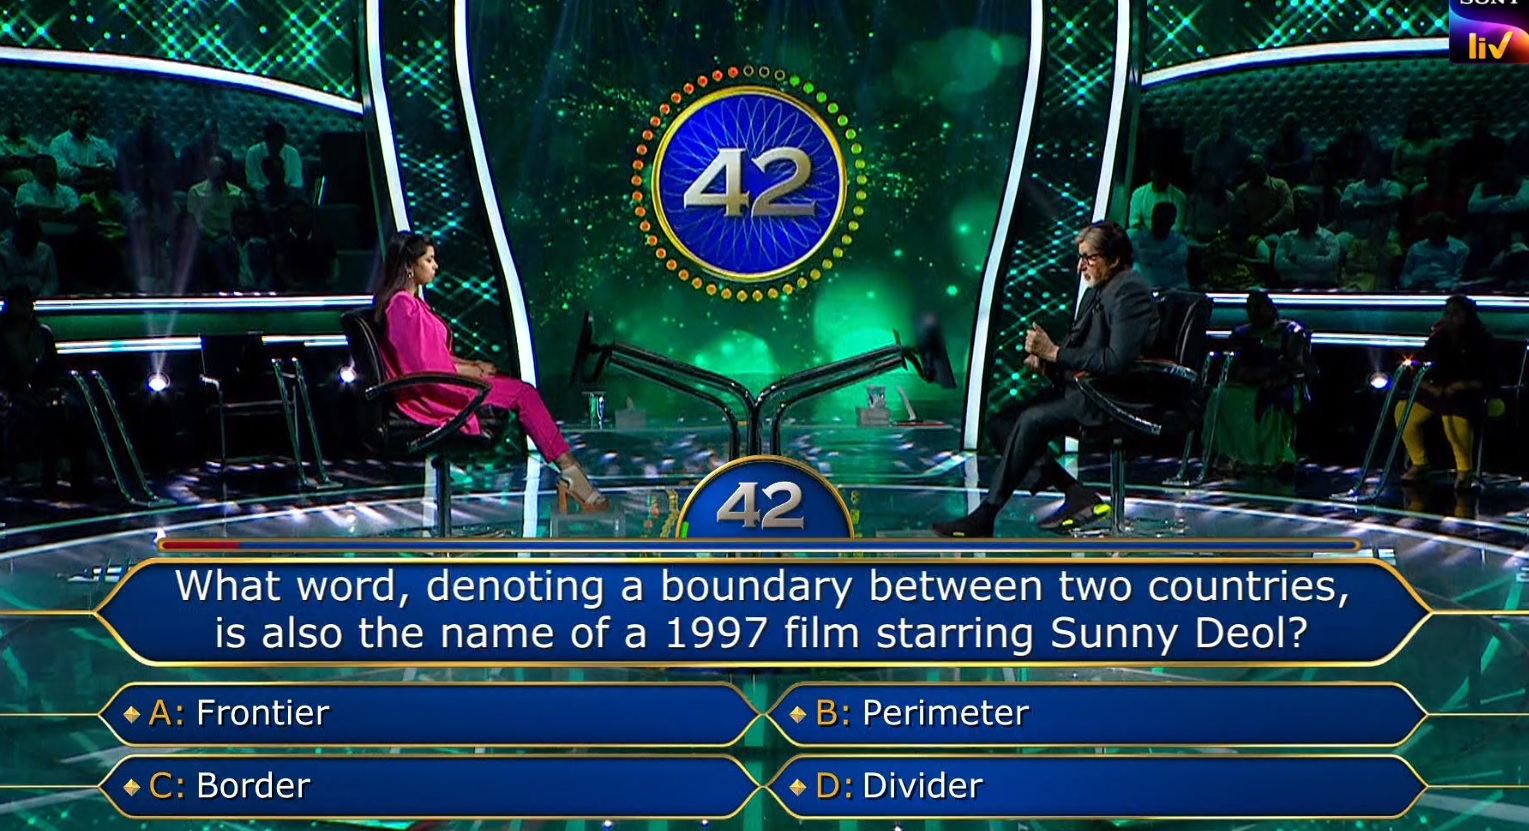 Ques : What word, denoting a boundary between two countries is also the name of a 1997 film starring Sunny Deol?